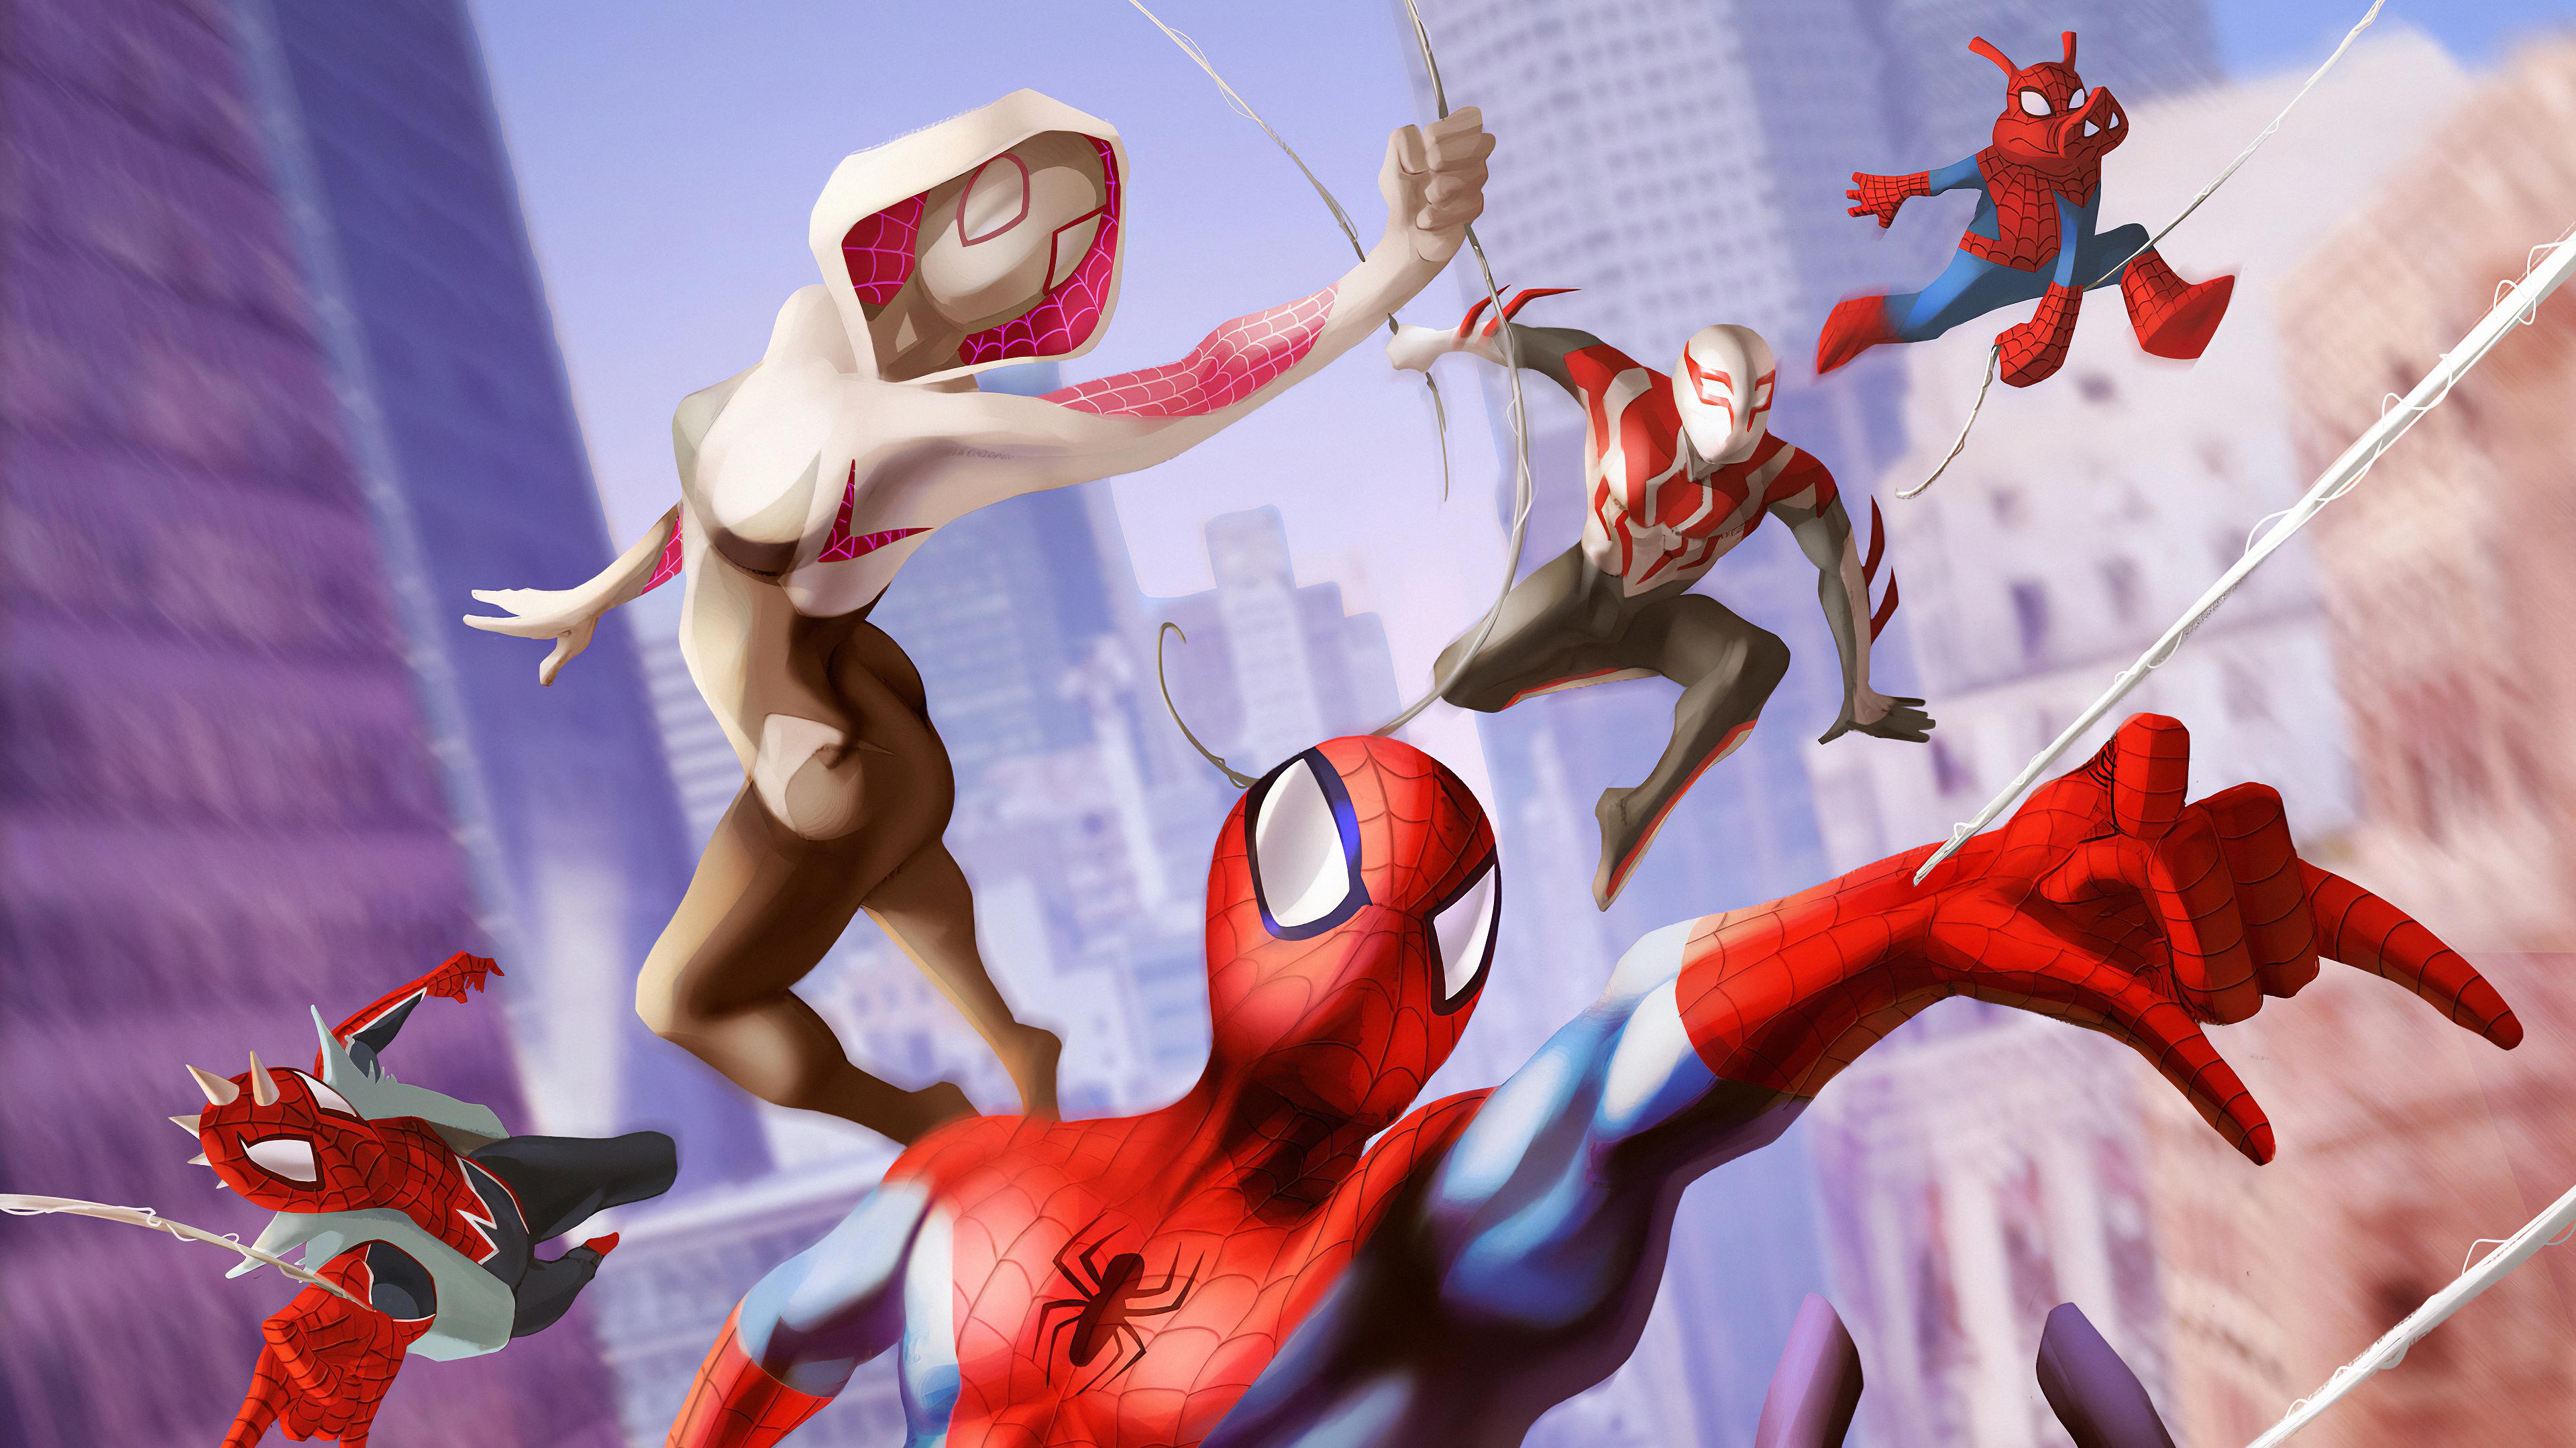 Movie Spider Man Across The Verse 4k Ultra HD Wallpaper By